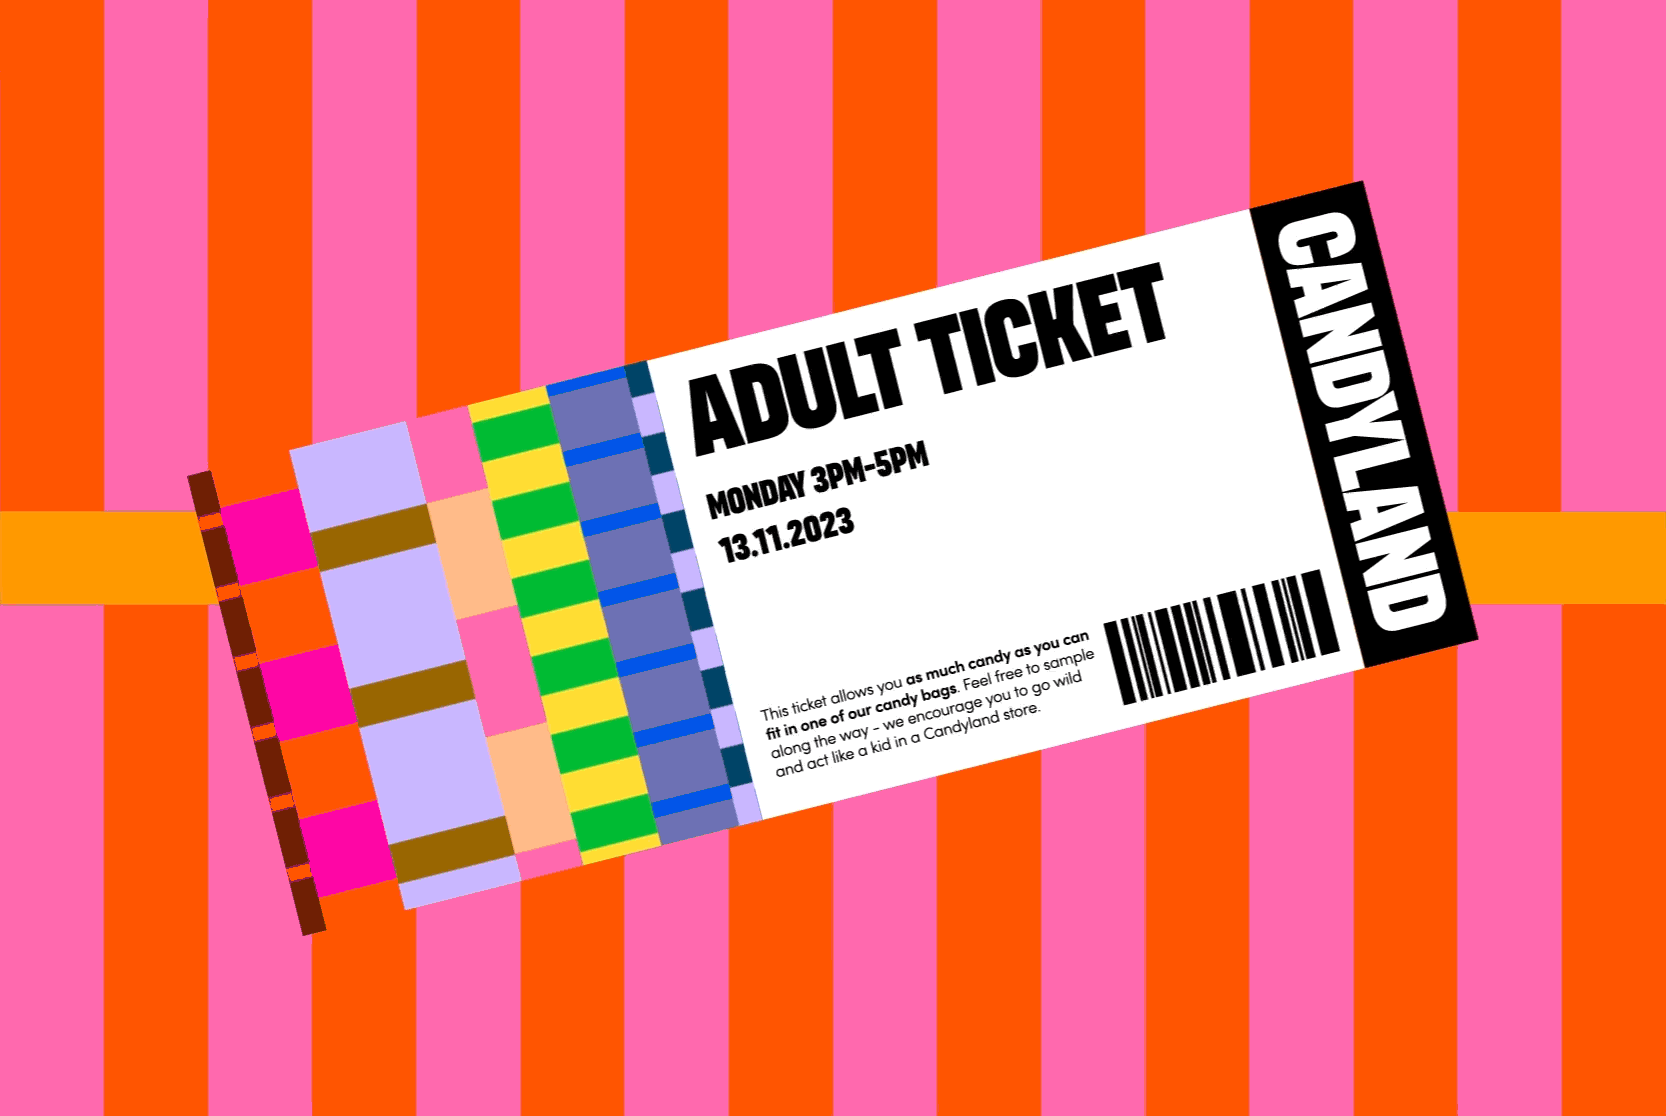 Candyland ticket gif in the style of the chaotic maximalism trend